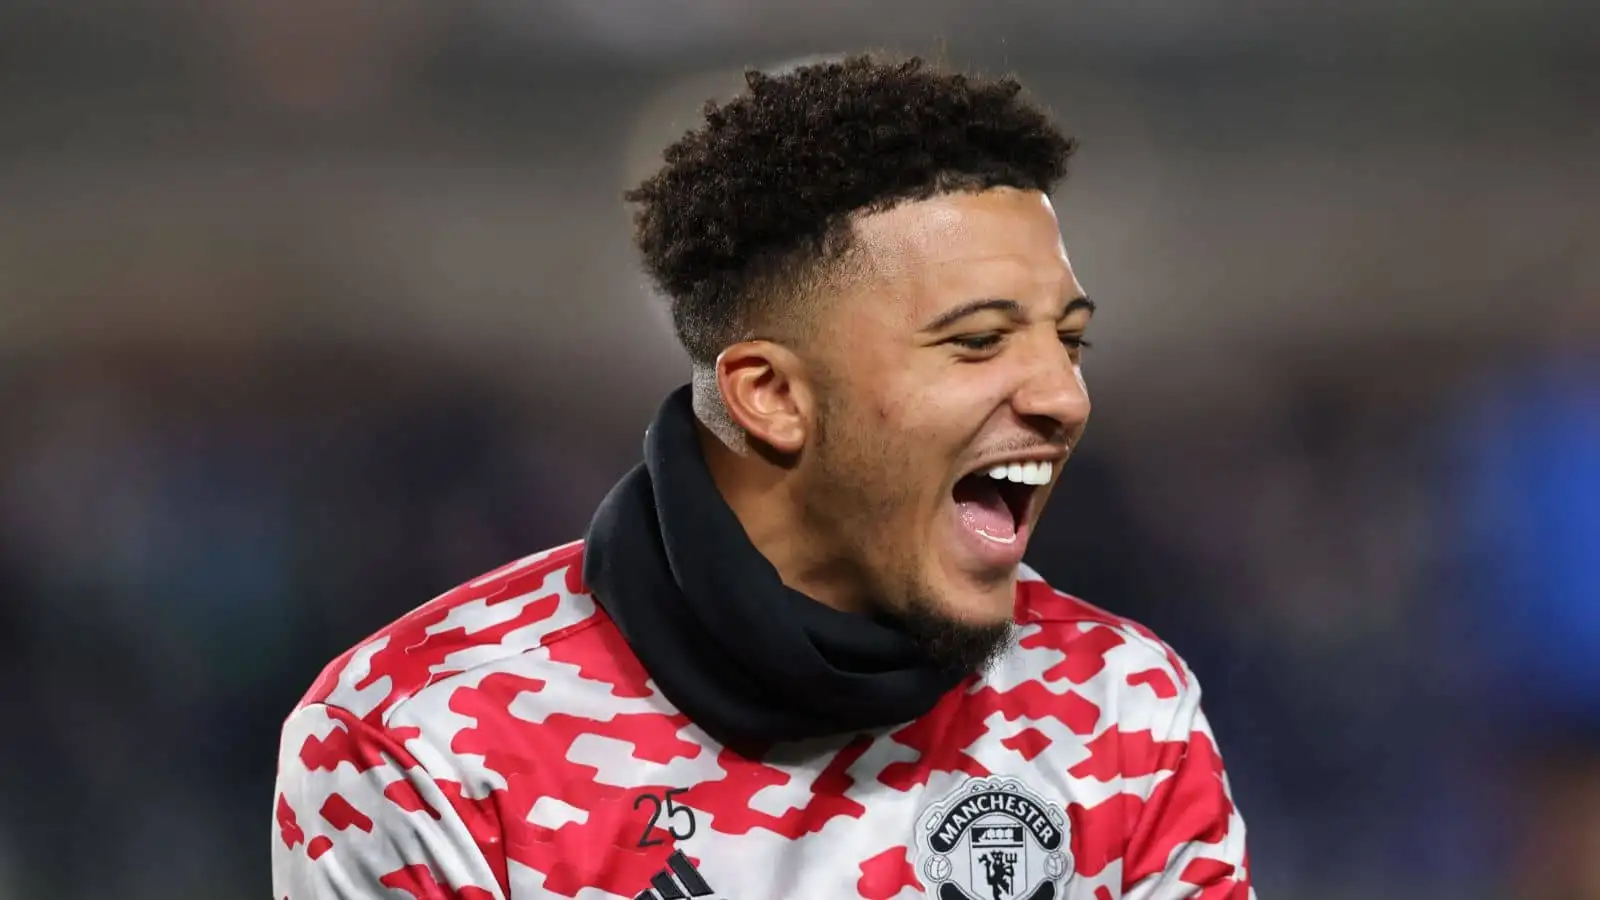 Jadon Sancho of Manchester United during the warm up prior to the UEFA Champions League match at Stadio di Bergamo, Bergamo